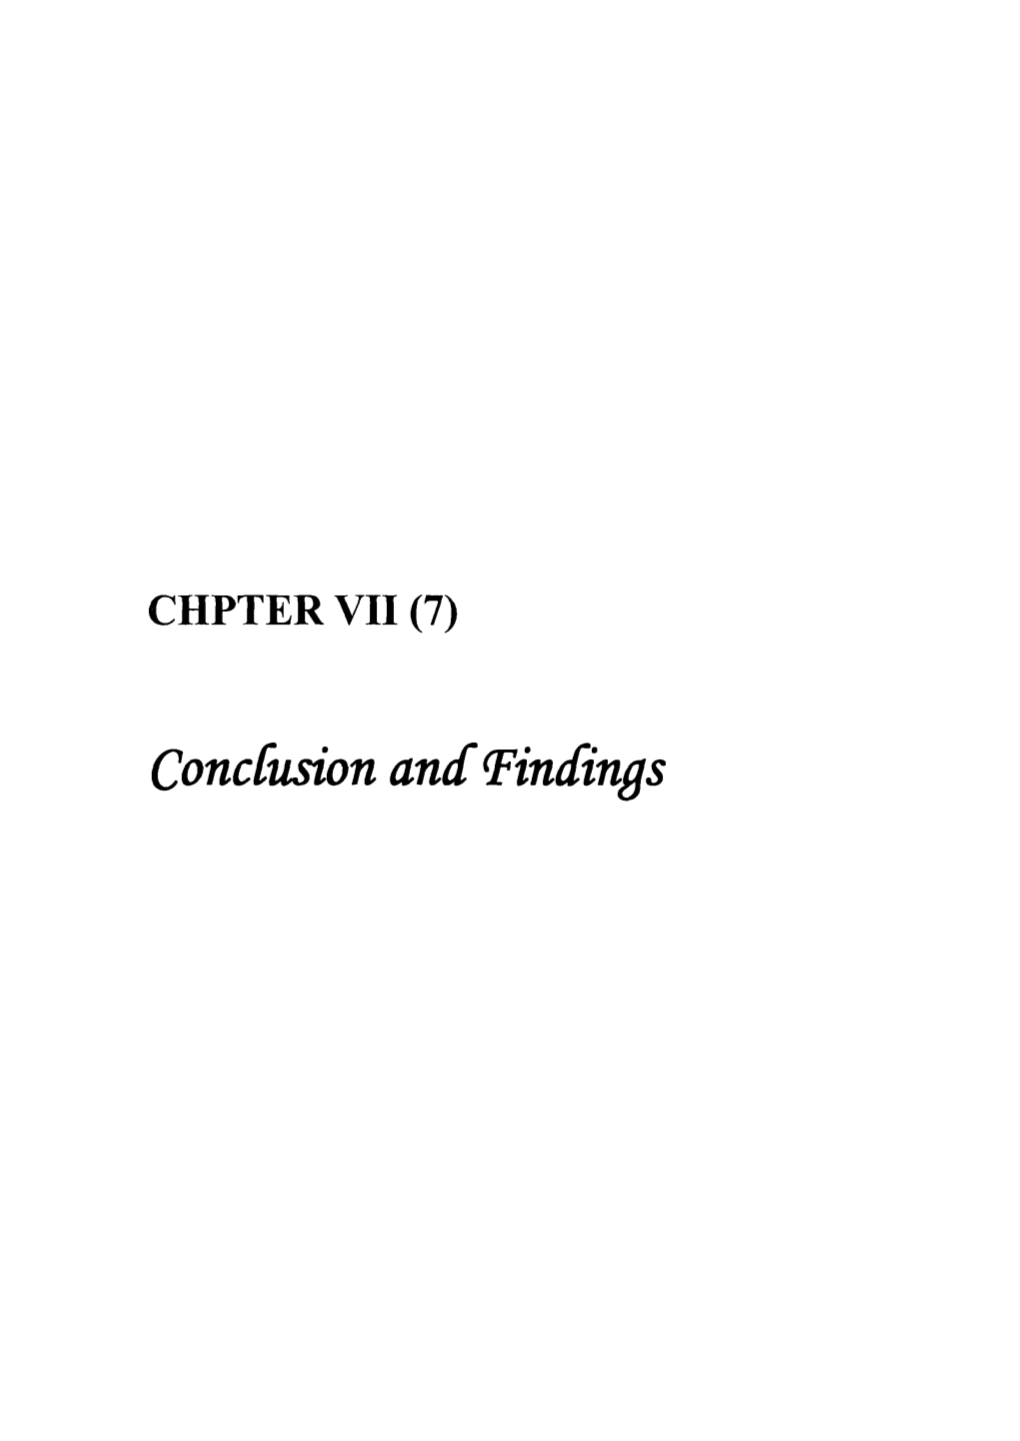 Condnsion Andtindmgs 289 CHPTER VII (7) Conclusion and Findings